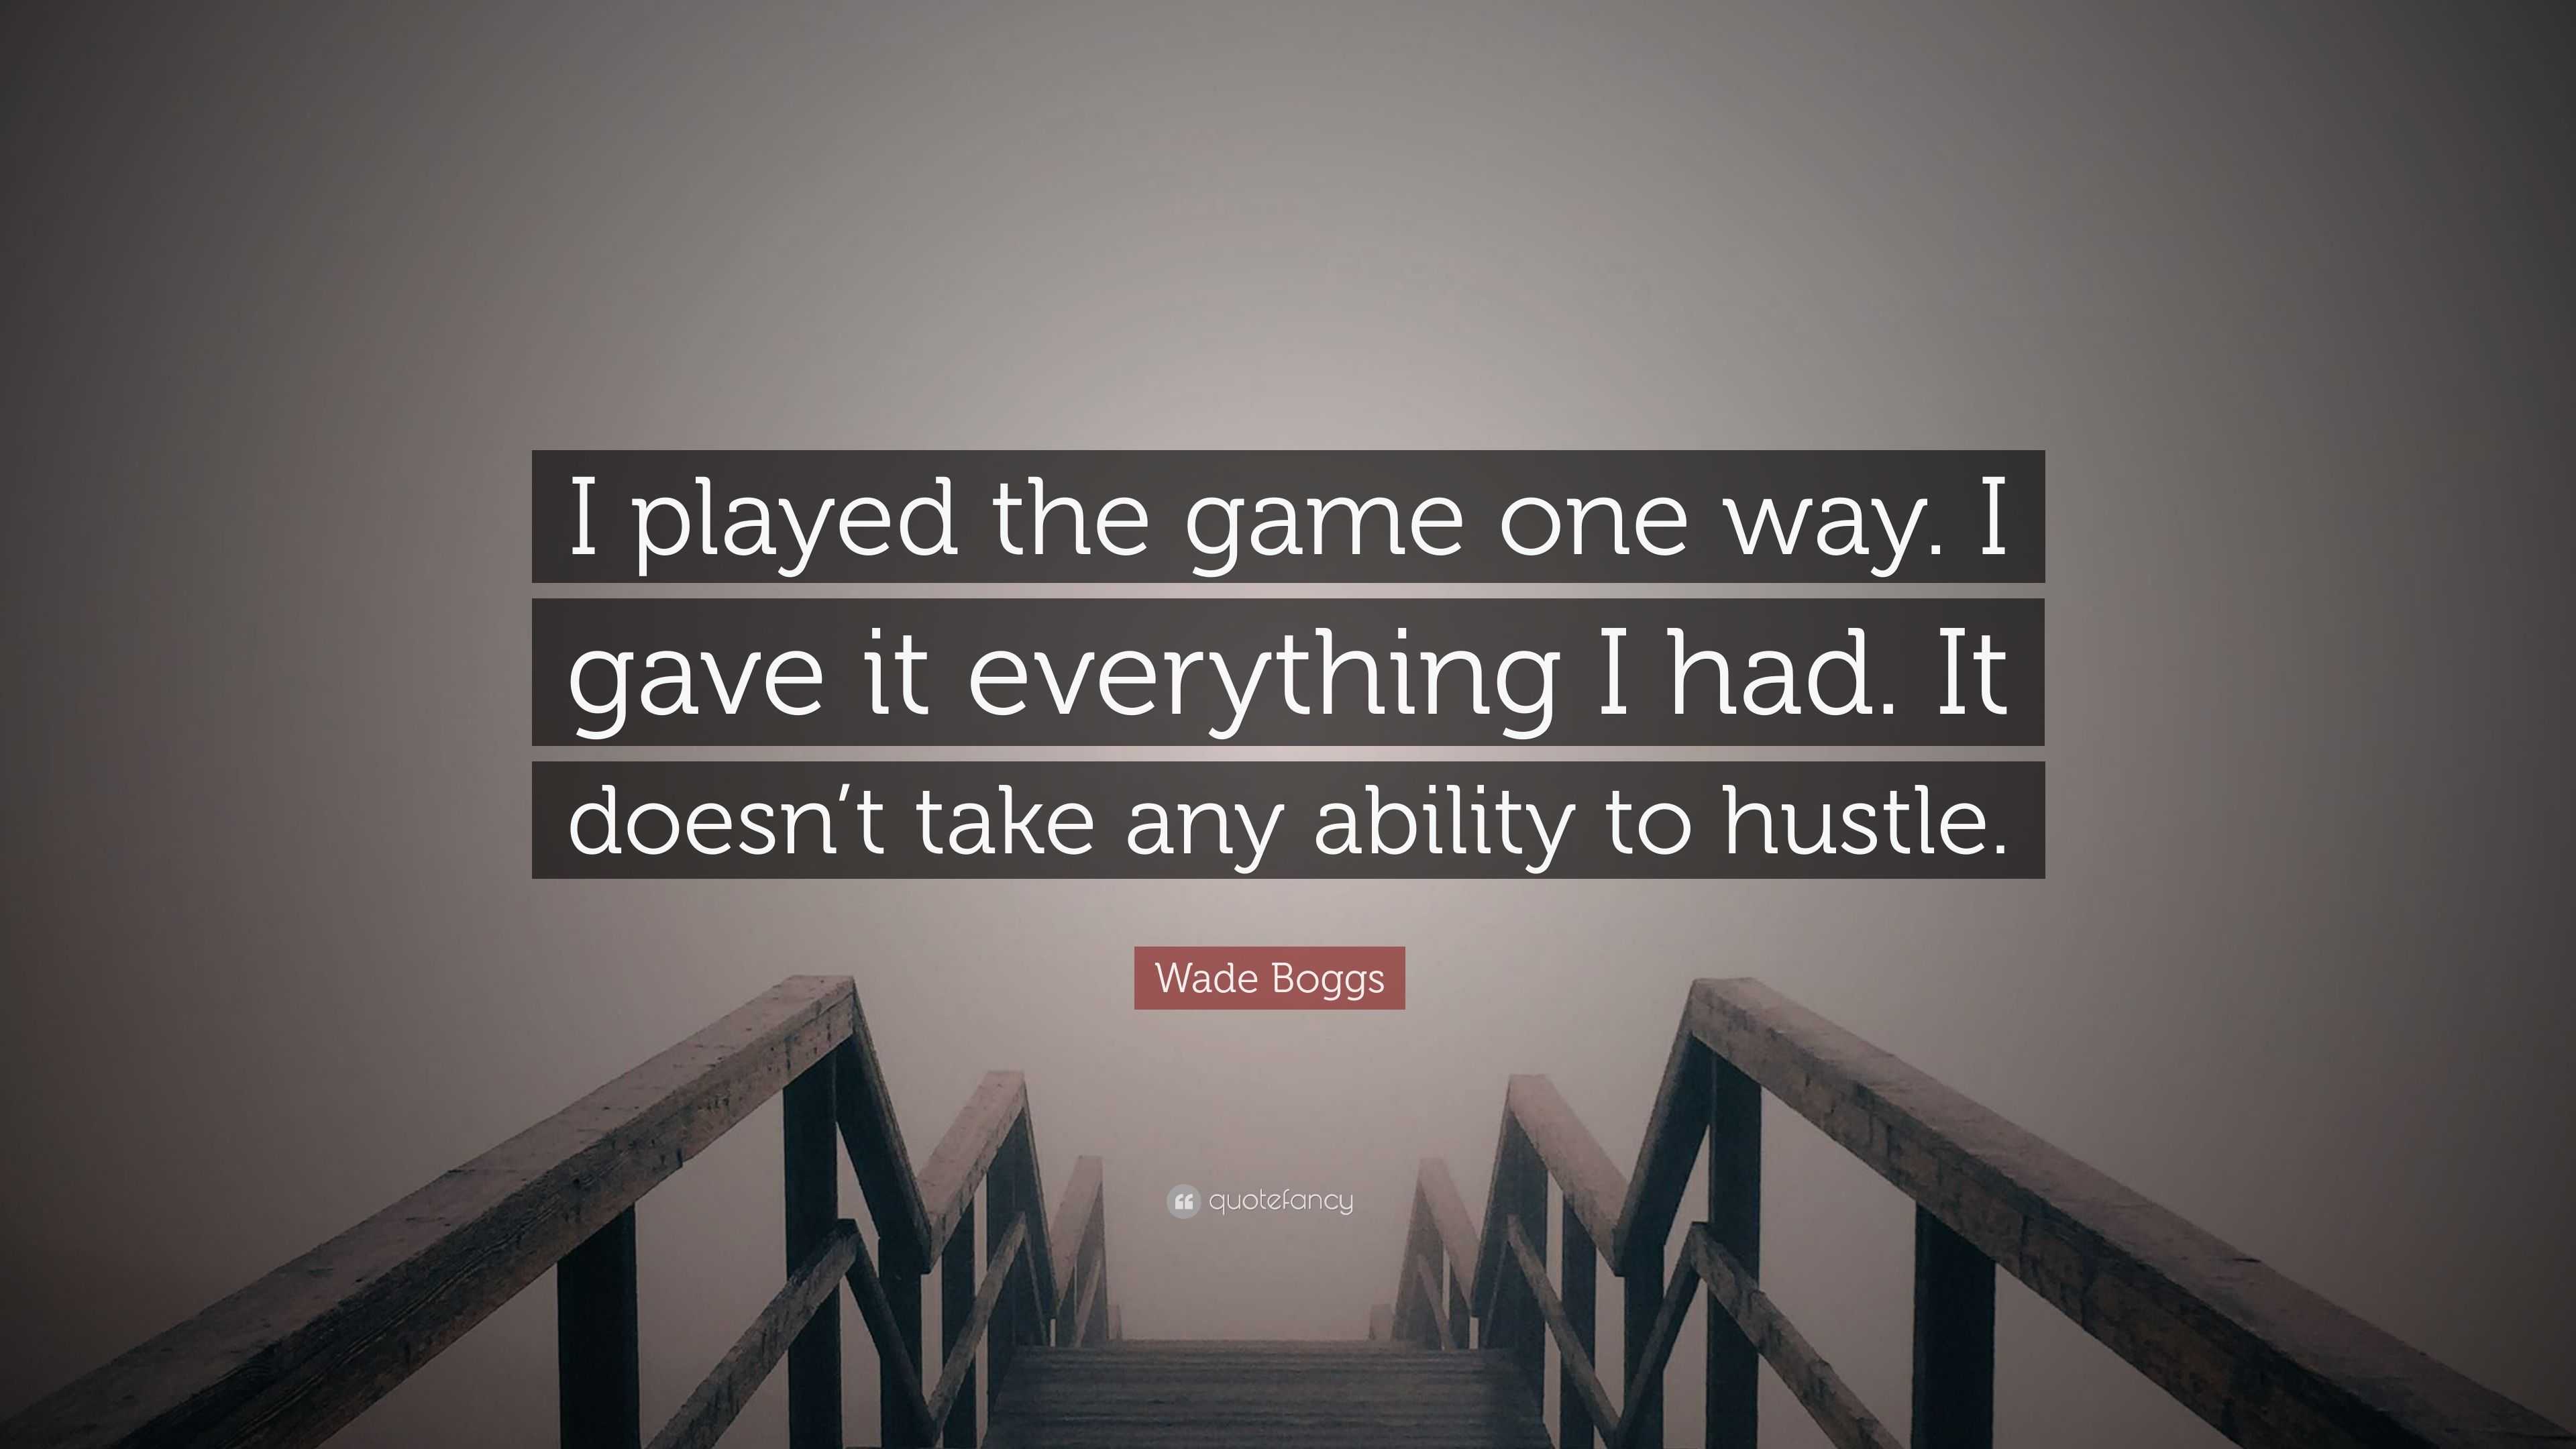 Get back in the game! #Engage  Me quotes, Inspirational quotes